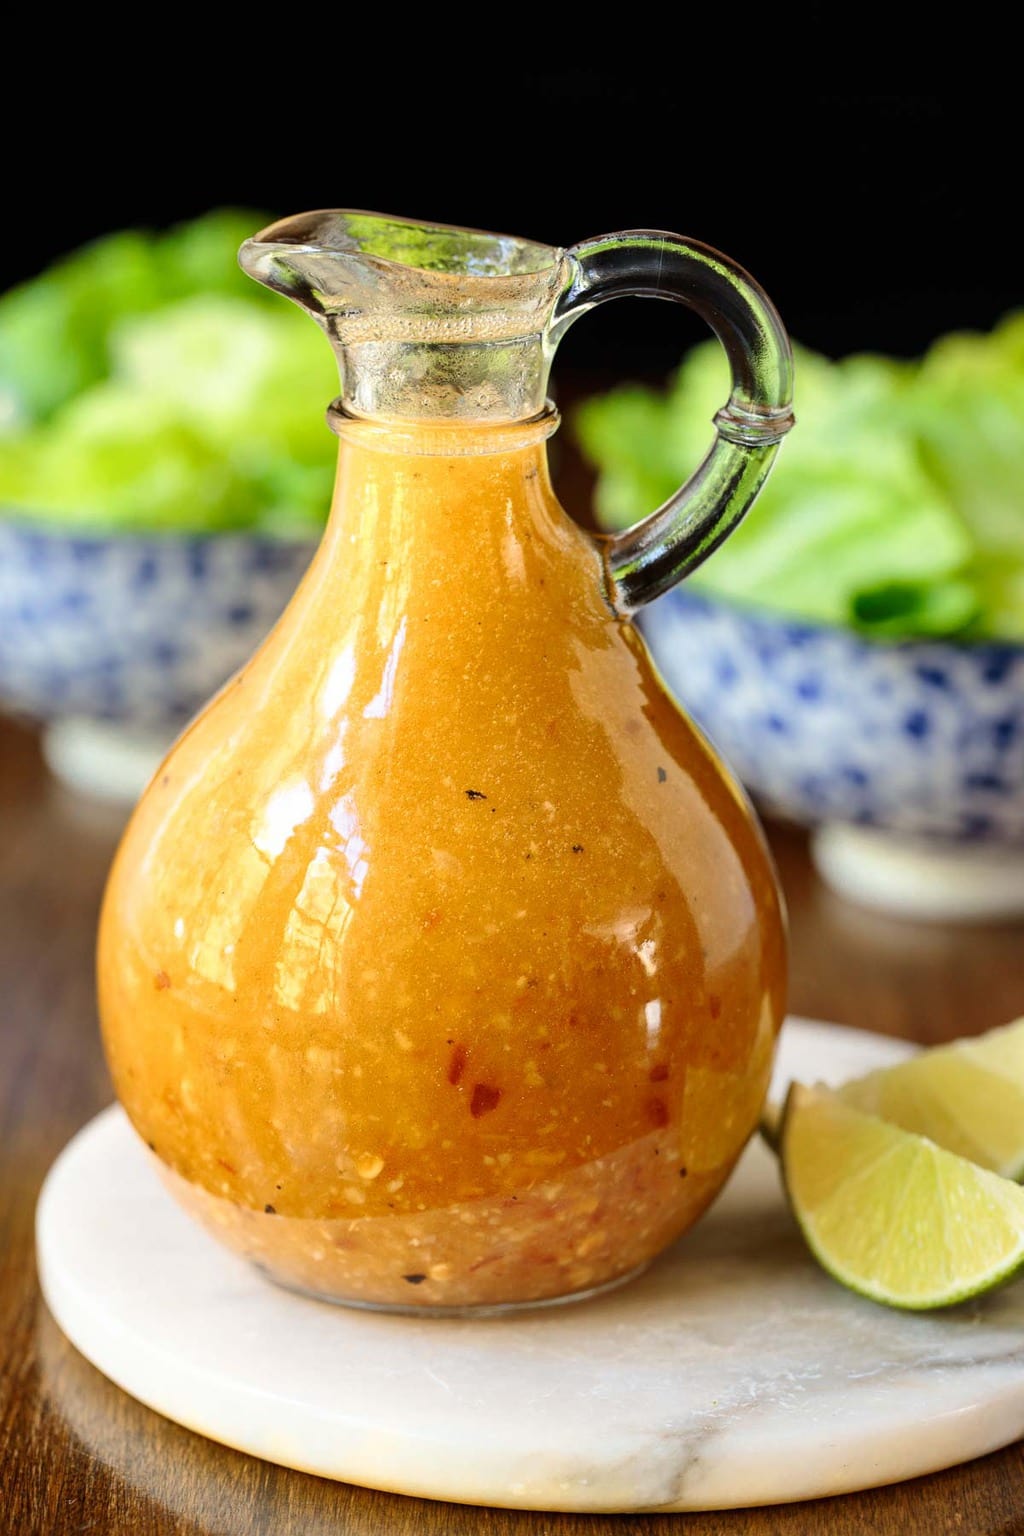 Photo of a small glass pitcher of Chili Lime Salad Dressing on a marble surface with fresh garden salads in the background.